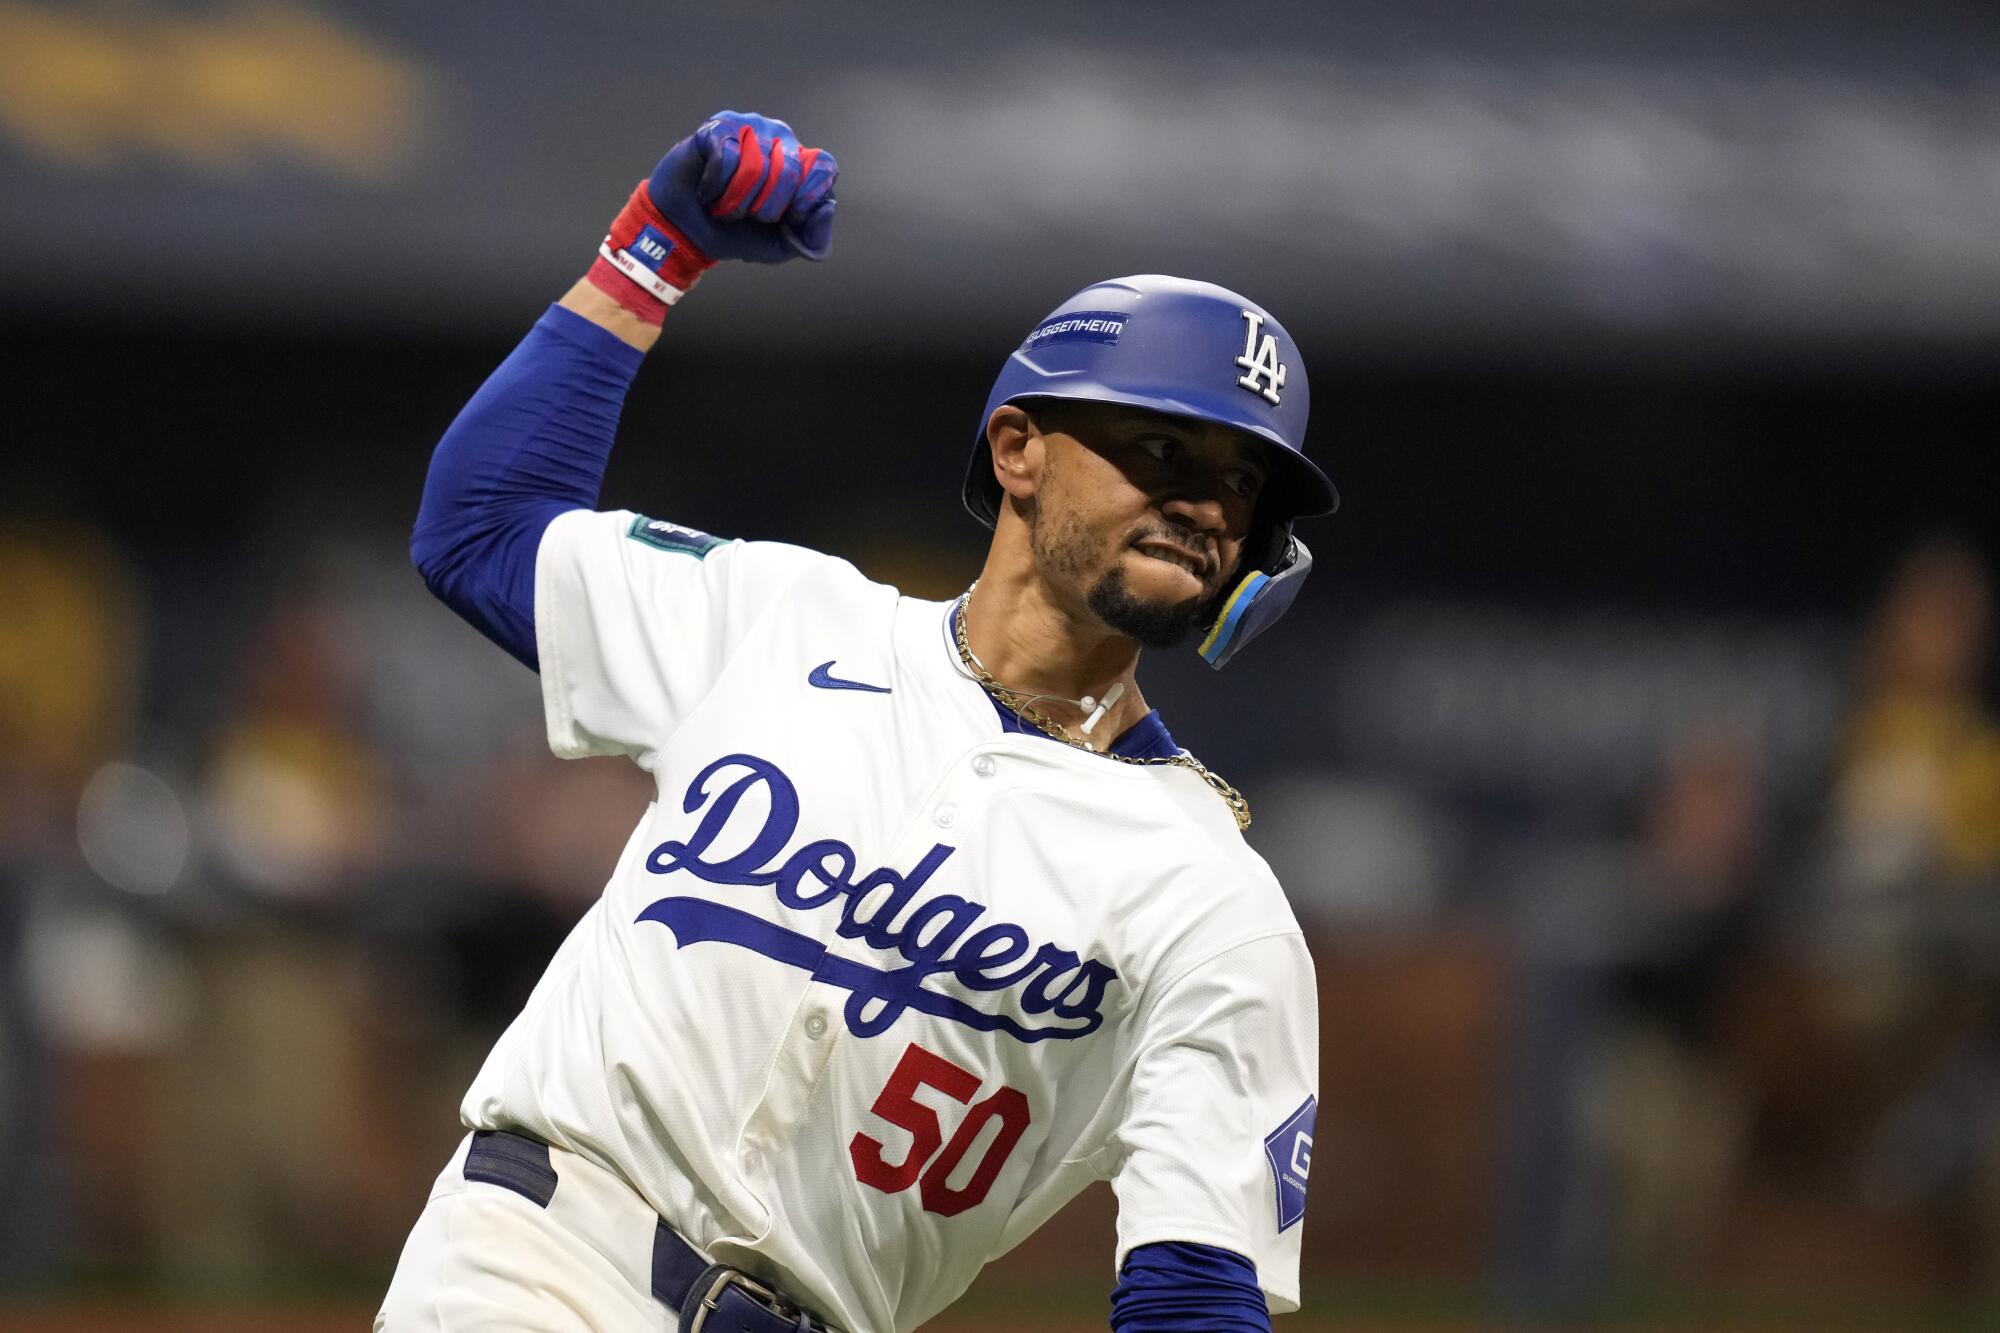 Dodgers star Mookie Betts celebrates after hitting a two-run home run against the San Diego Padres on Thursday.